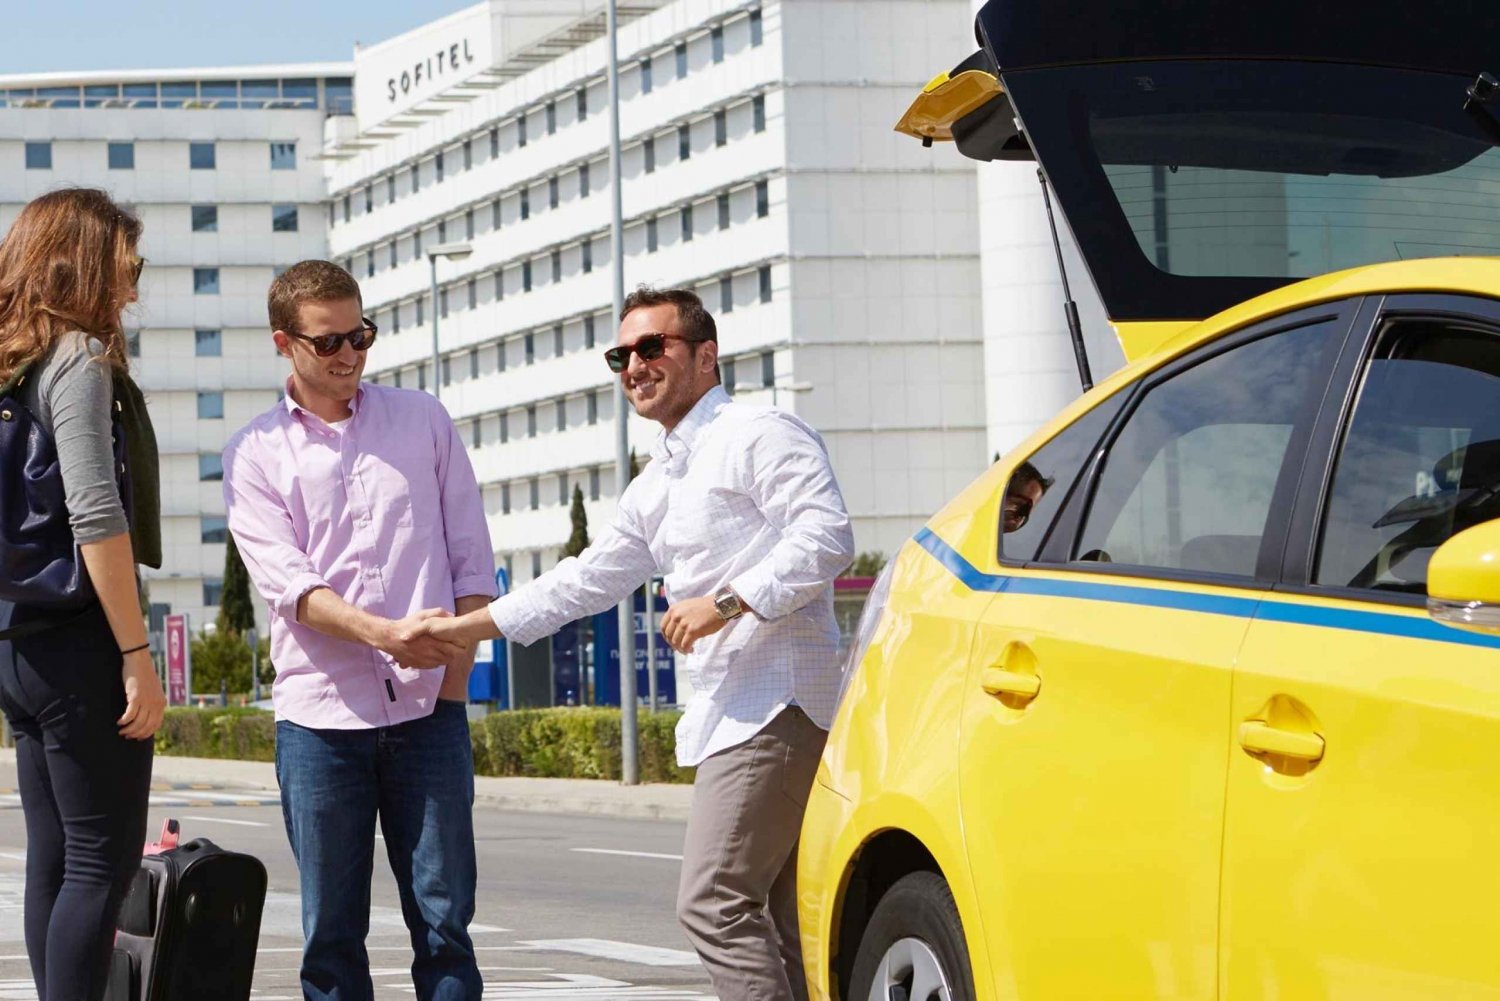 Athens Airport: Private Transfer to or from City Center